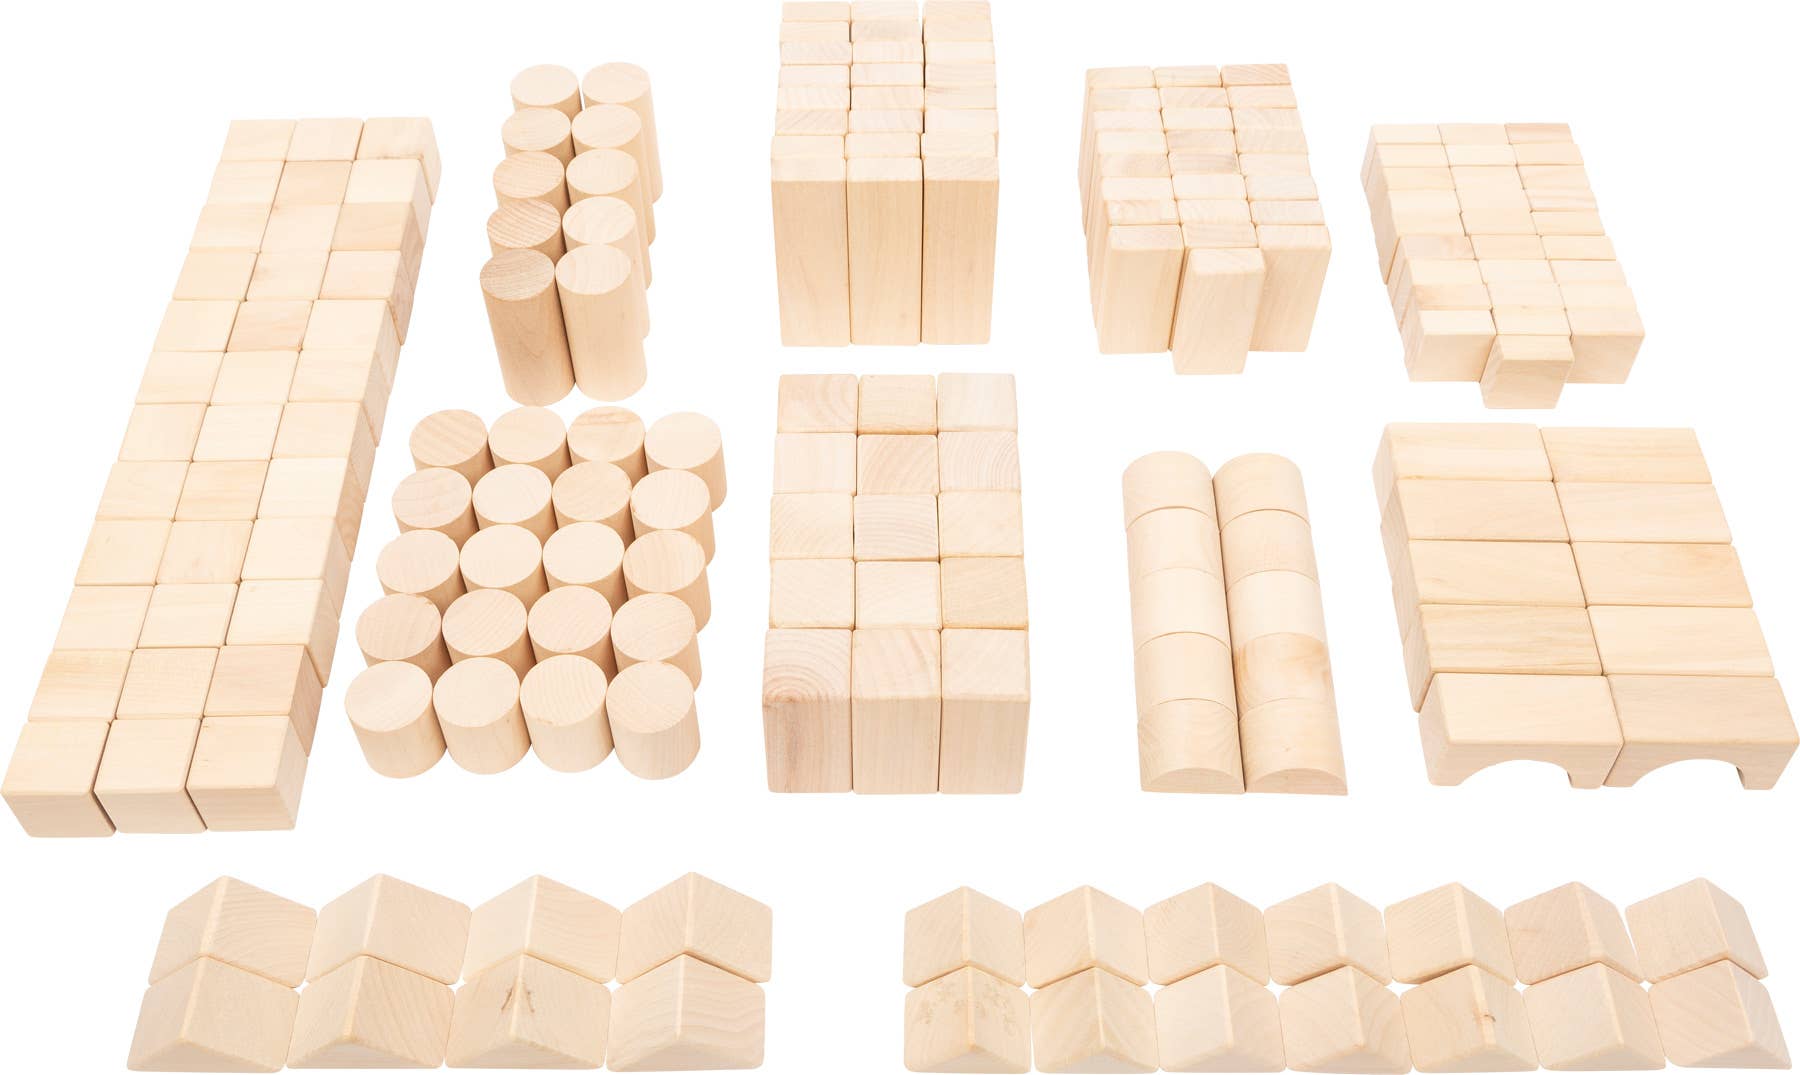 Bulk Block Play Set 200 Pieces, This bulk block play set comes with 200 wooden building blocks made of wood and offers children a large selection of differently shaped building blocks for building architectural masterpieces. The natural wooden blocks are robust and come in a classic design. And to prevent any Wooden blocks from getting lost, they can be securely stored in the included cloth bag. Soft, rounded edges prevent injuries during play. With these Wooden building blocks, young children can train the